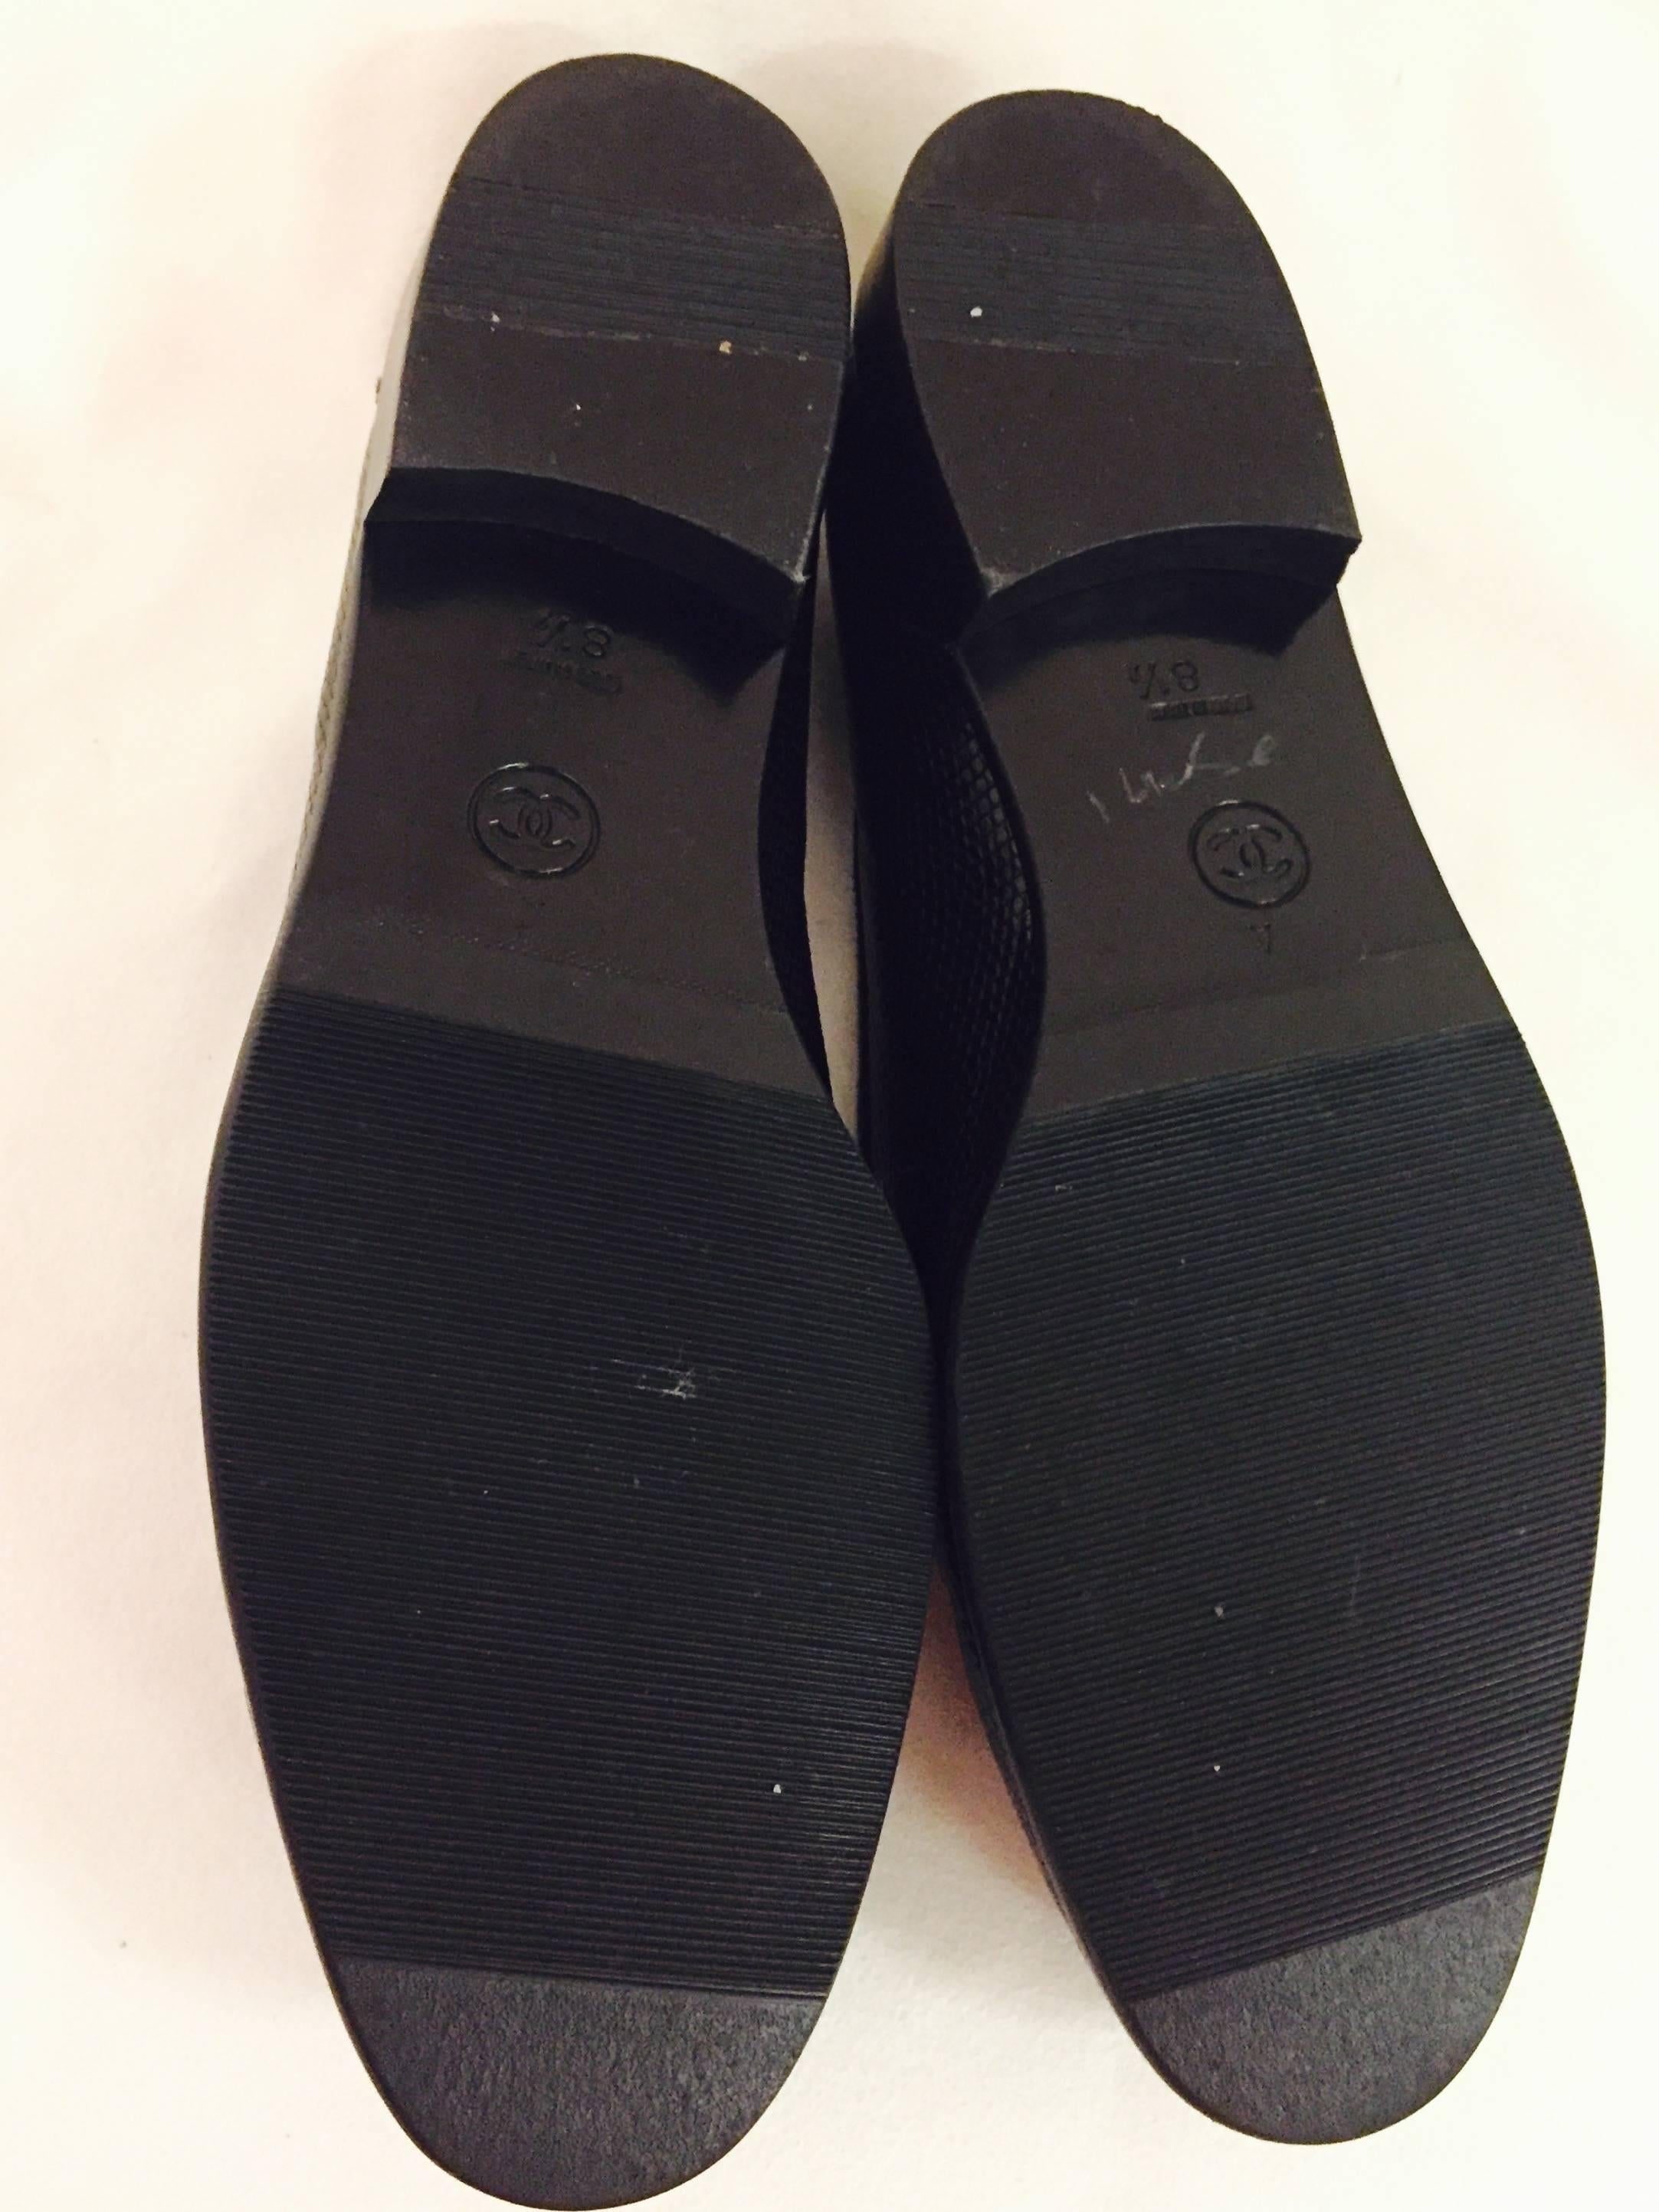 Classic Chanel Black Lizard Loafers With Stitched CC Logo  1